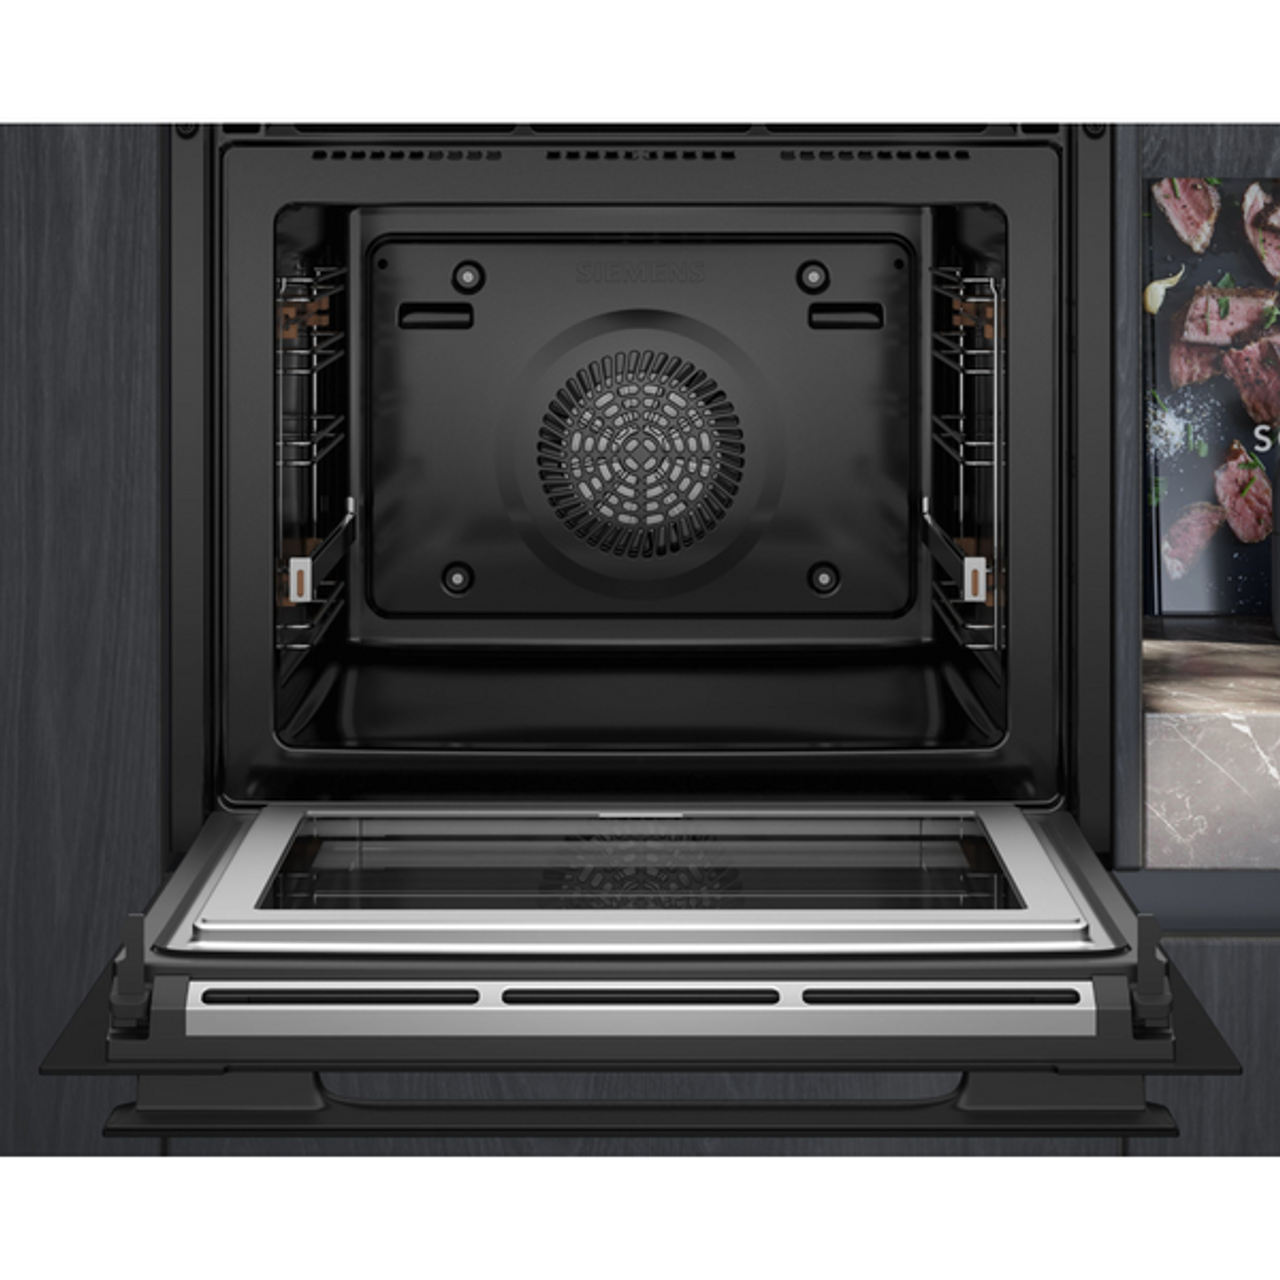 HN978GQB1B - 60cm iQ700 Built-in oven with added steam and microwave function - Black